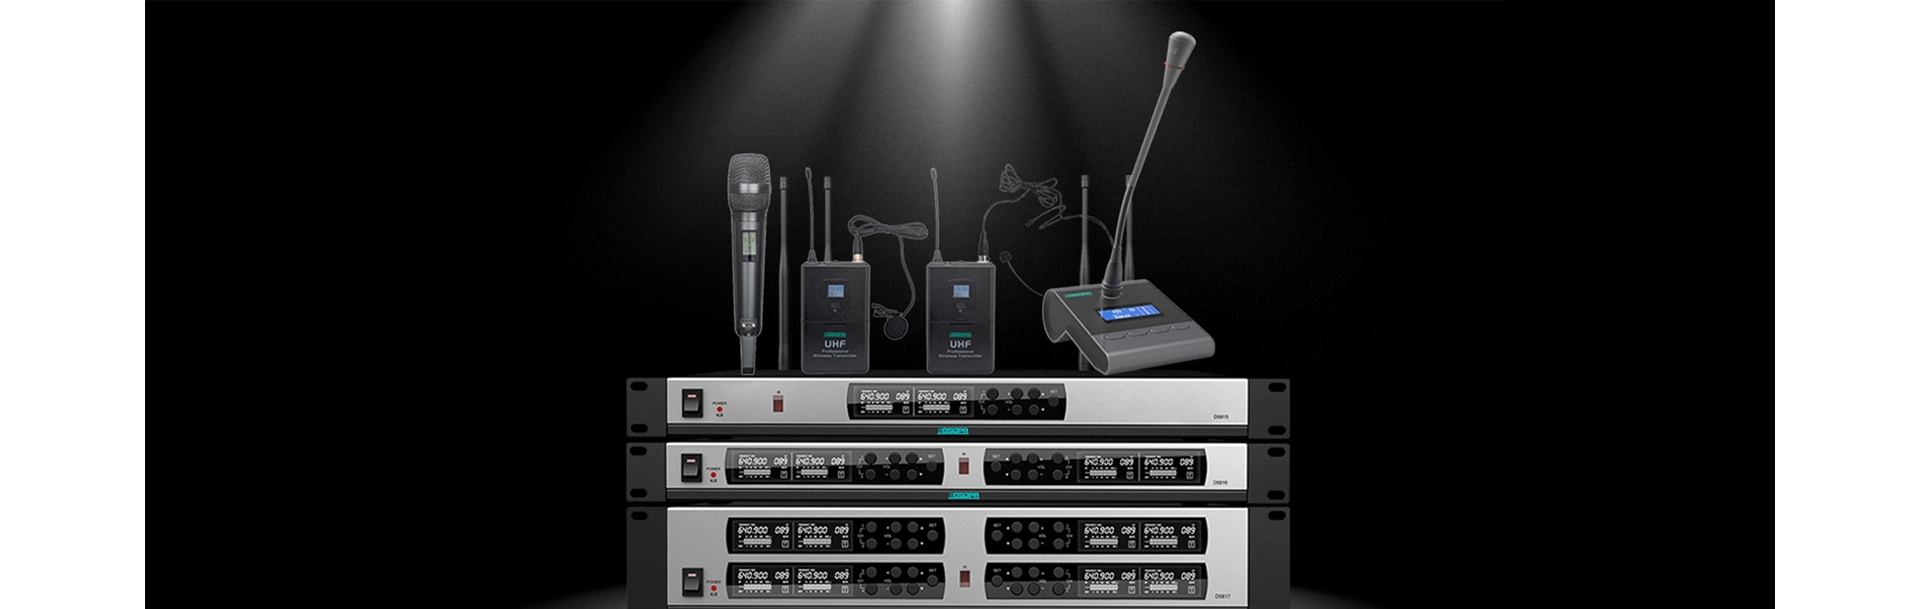 4 Channels Wireless Microphone System Receiver